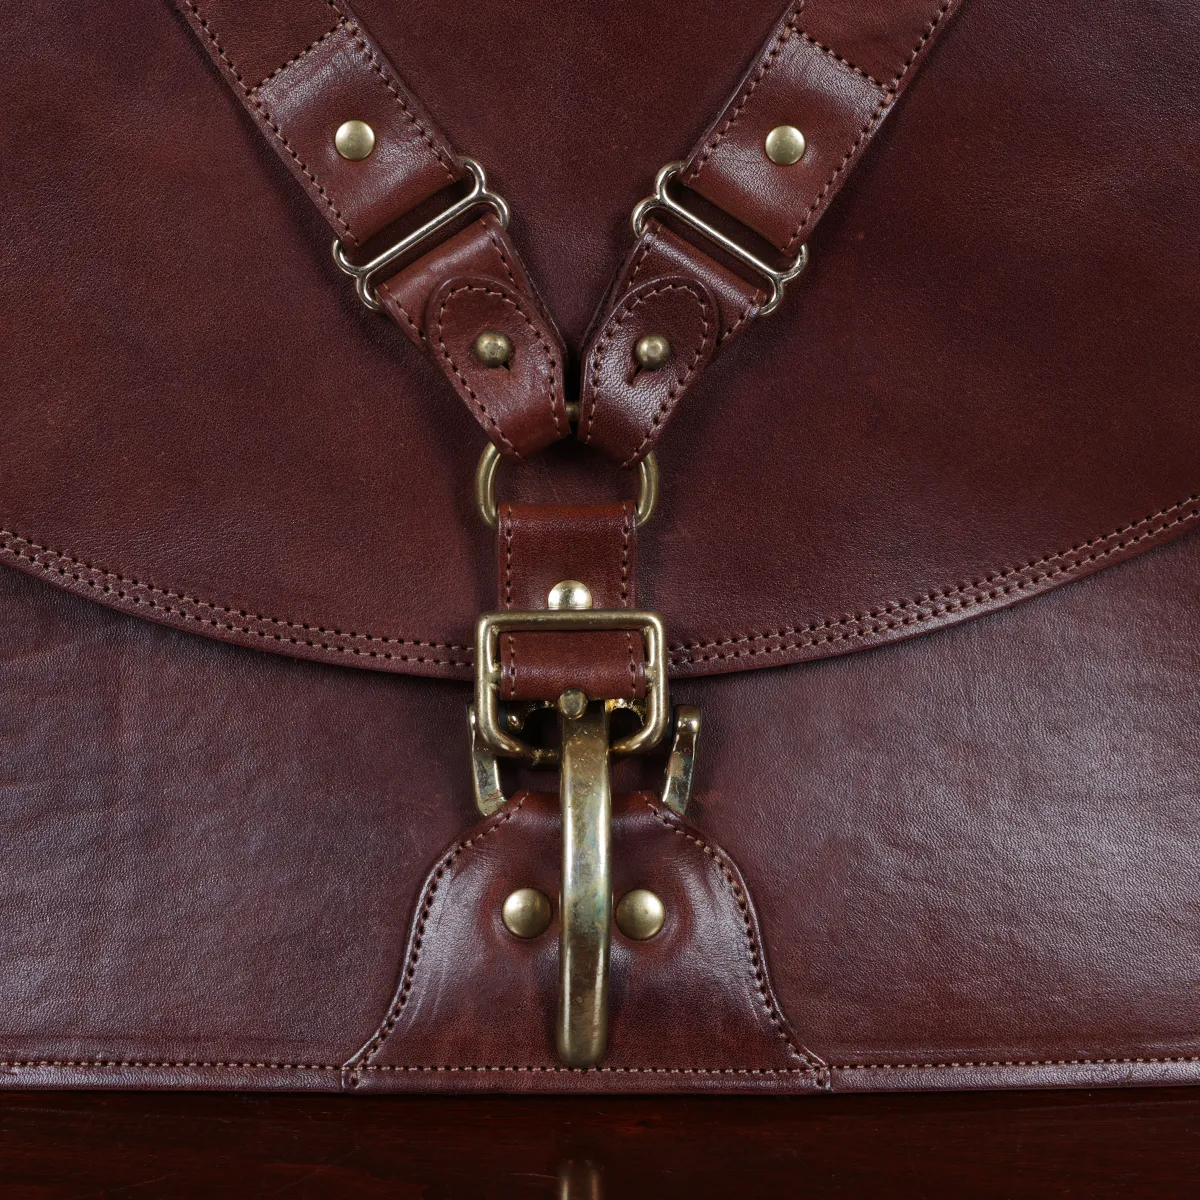 commander leather laptop briefcase on a wooden table with a dark background - front view of cinch